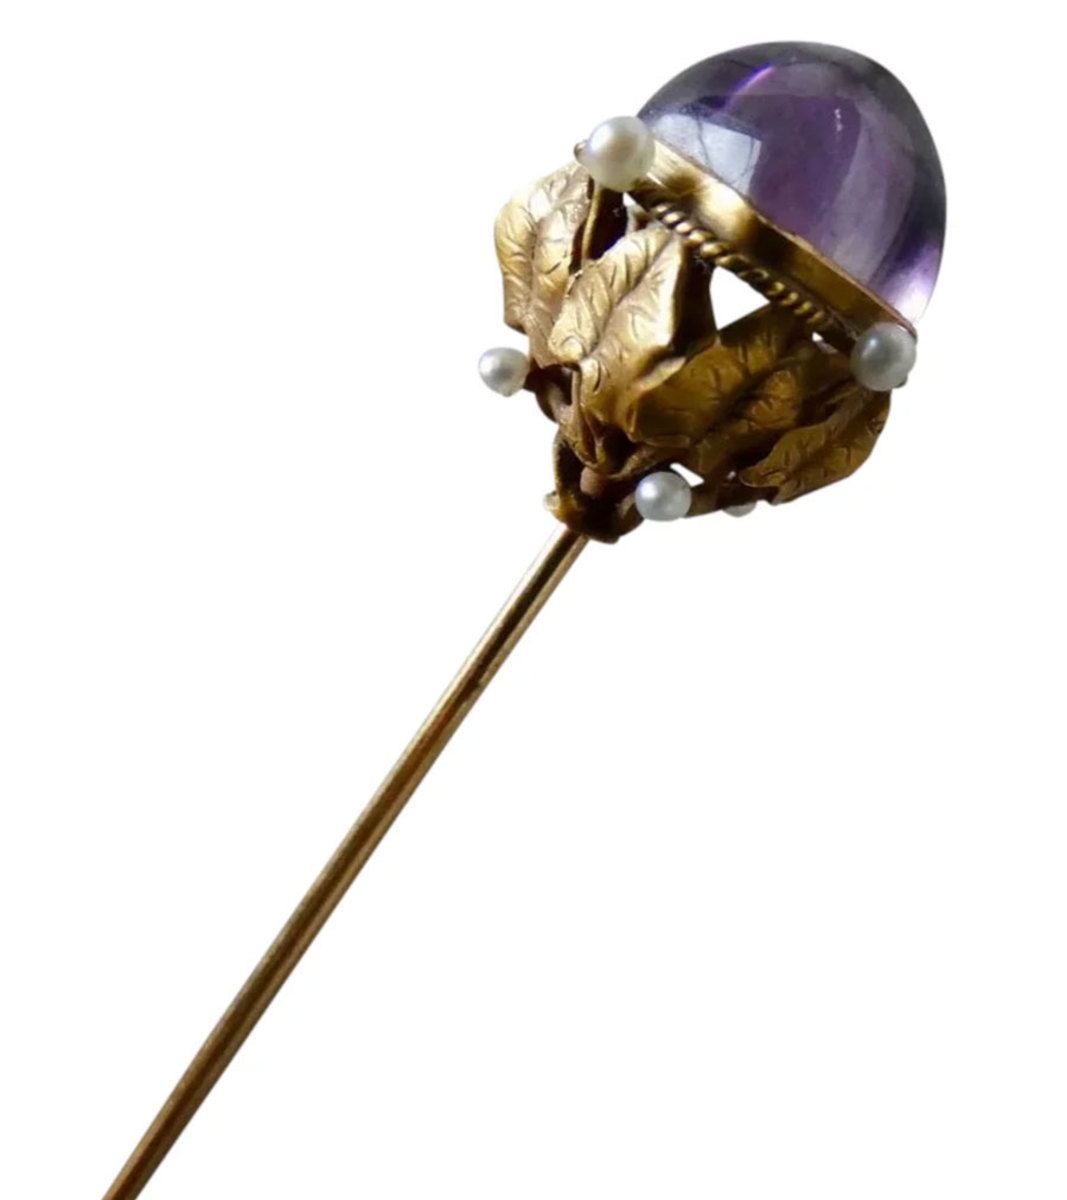 Victorian or Art Nouveau 14k gold and amethyst hatpin with a leaf design and seed pearl accents, 7-5/8" l; $450.